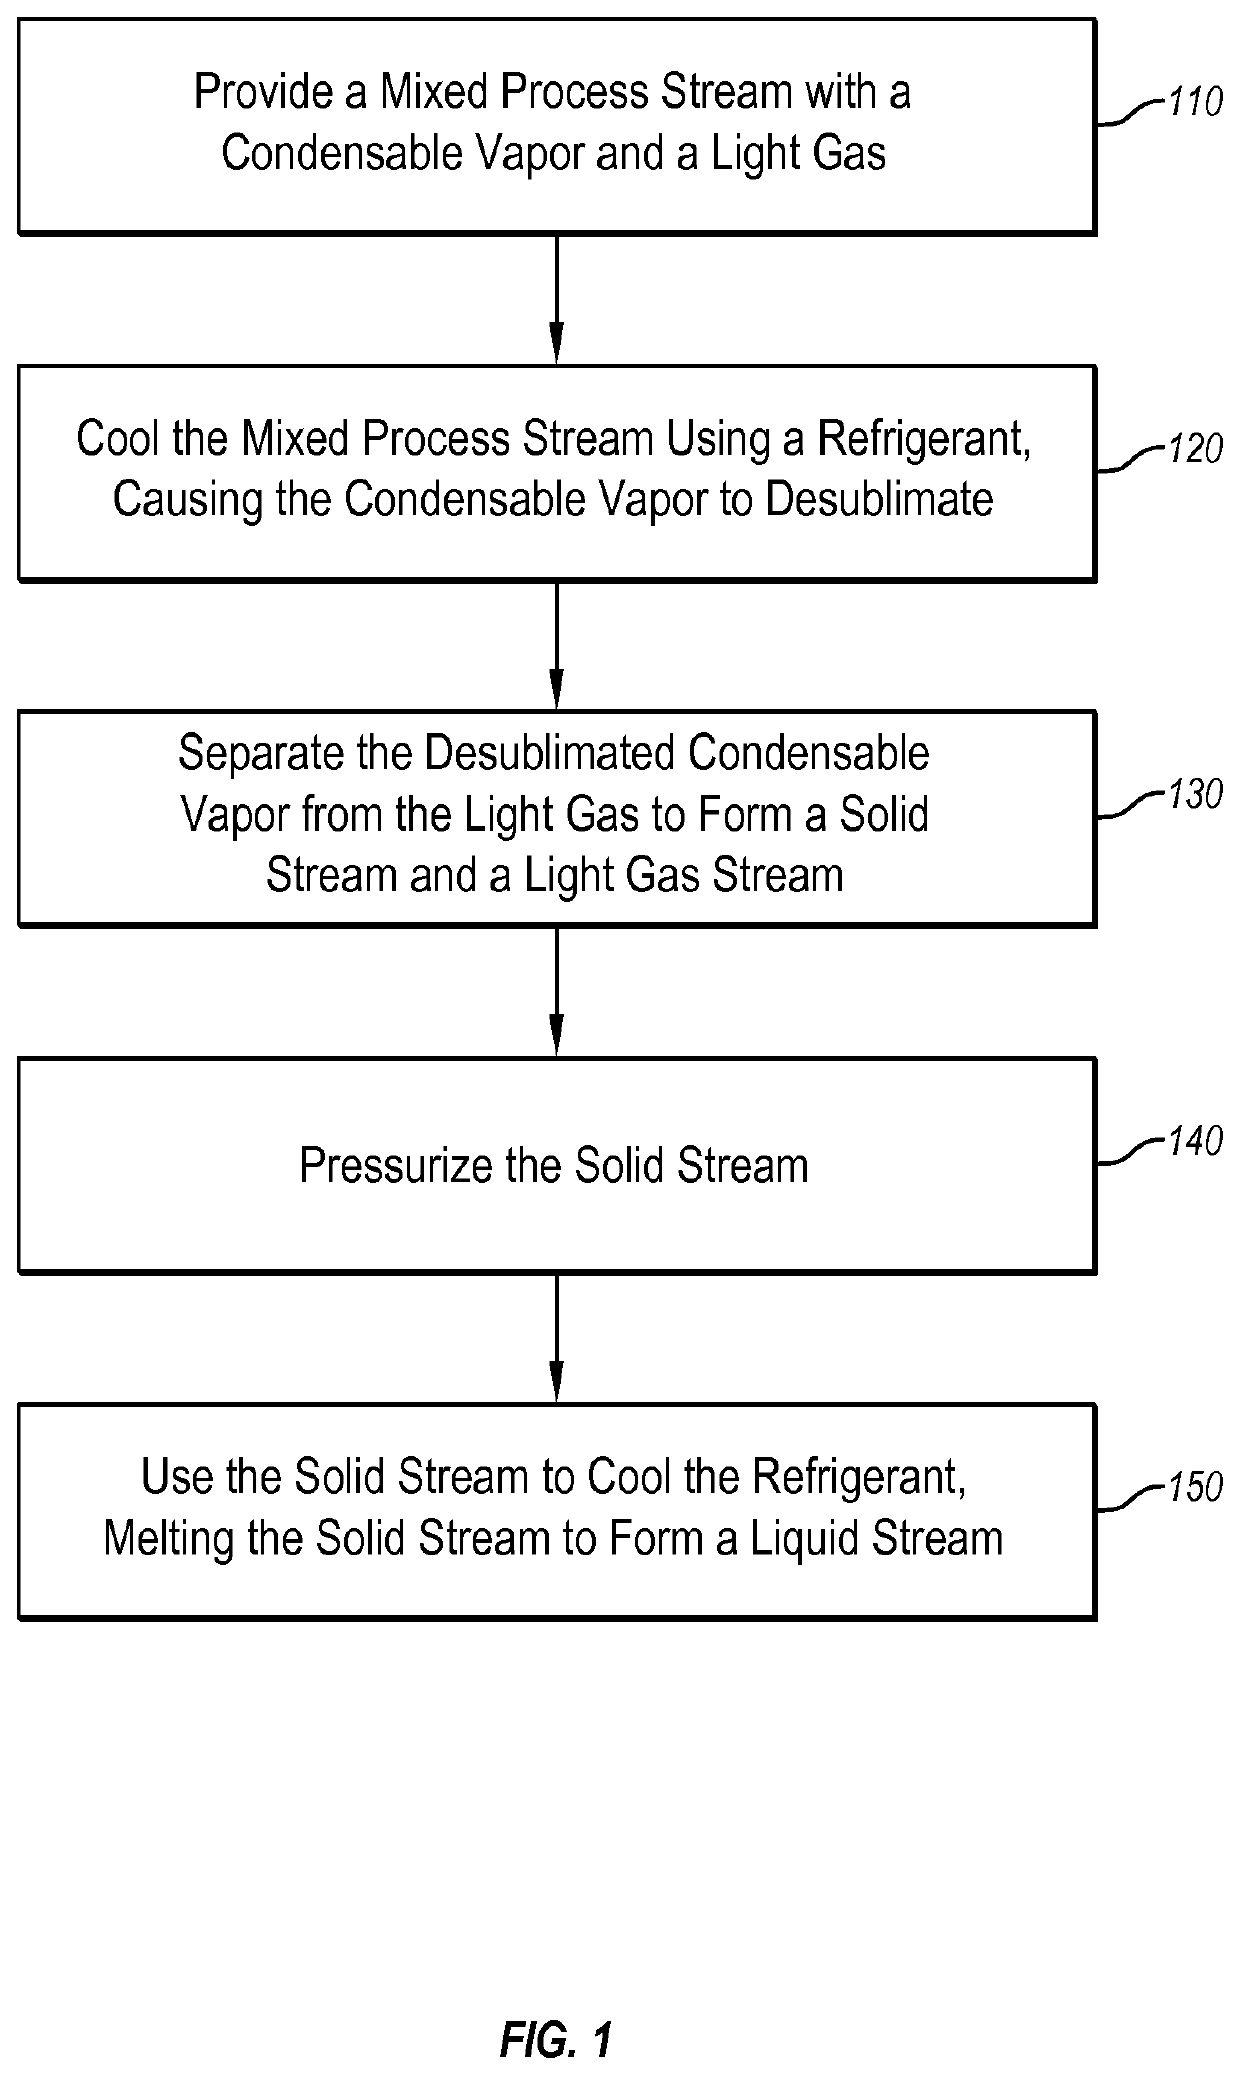 Systems and methods for separating condensable vapors from light gases or liquids by recuperative cryogenic processes